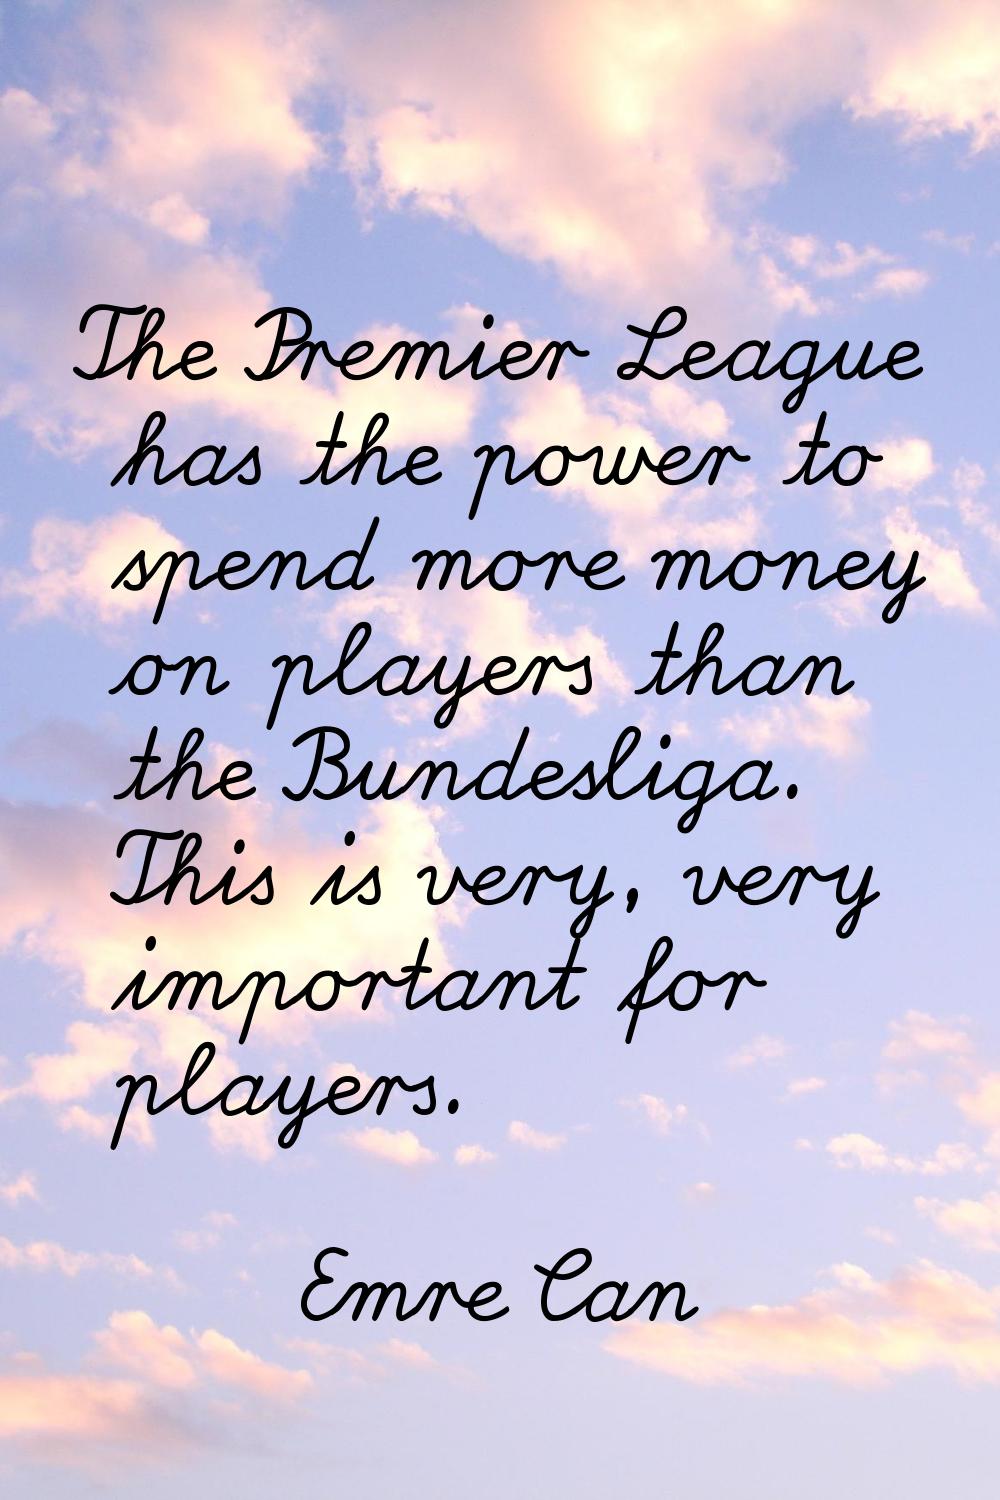 The Premier League has the power to spend more money on players than the Bundesliga. This is very, 